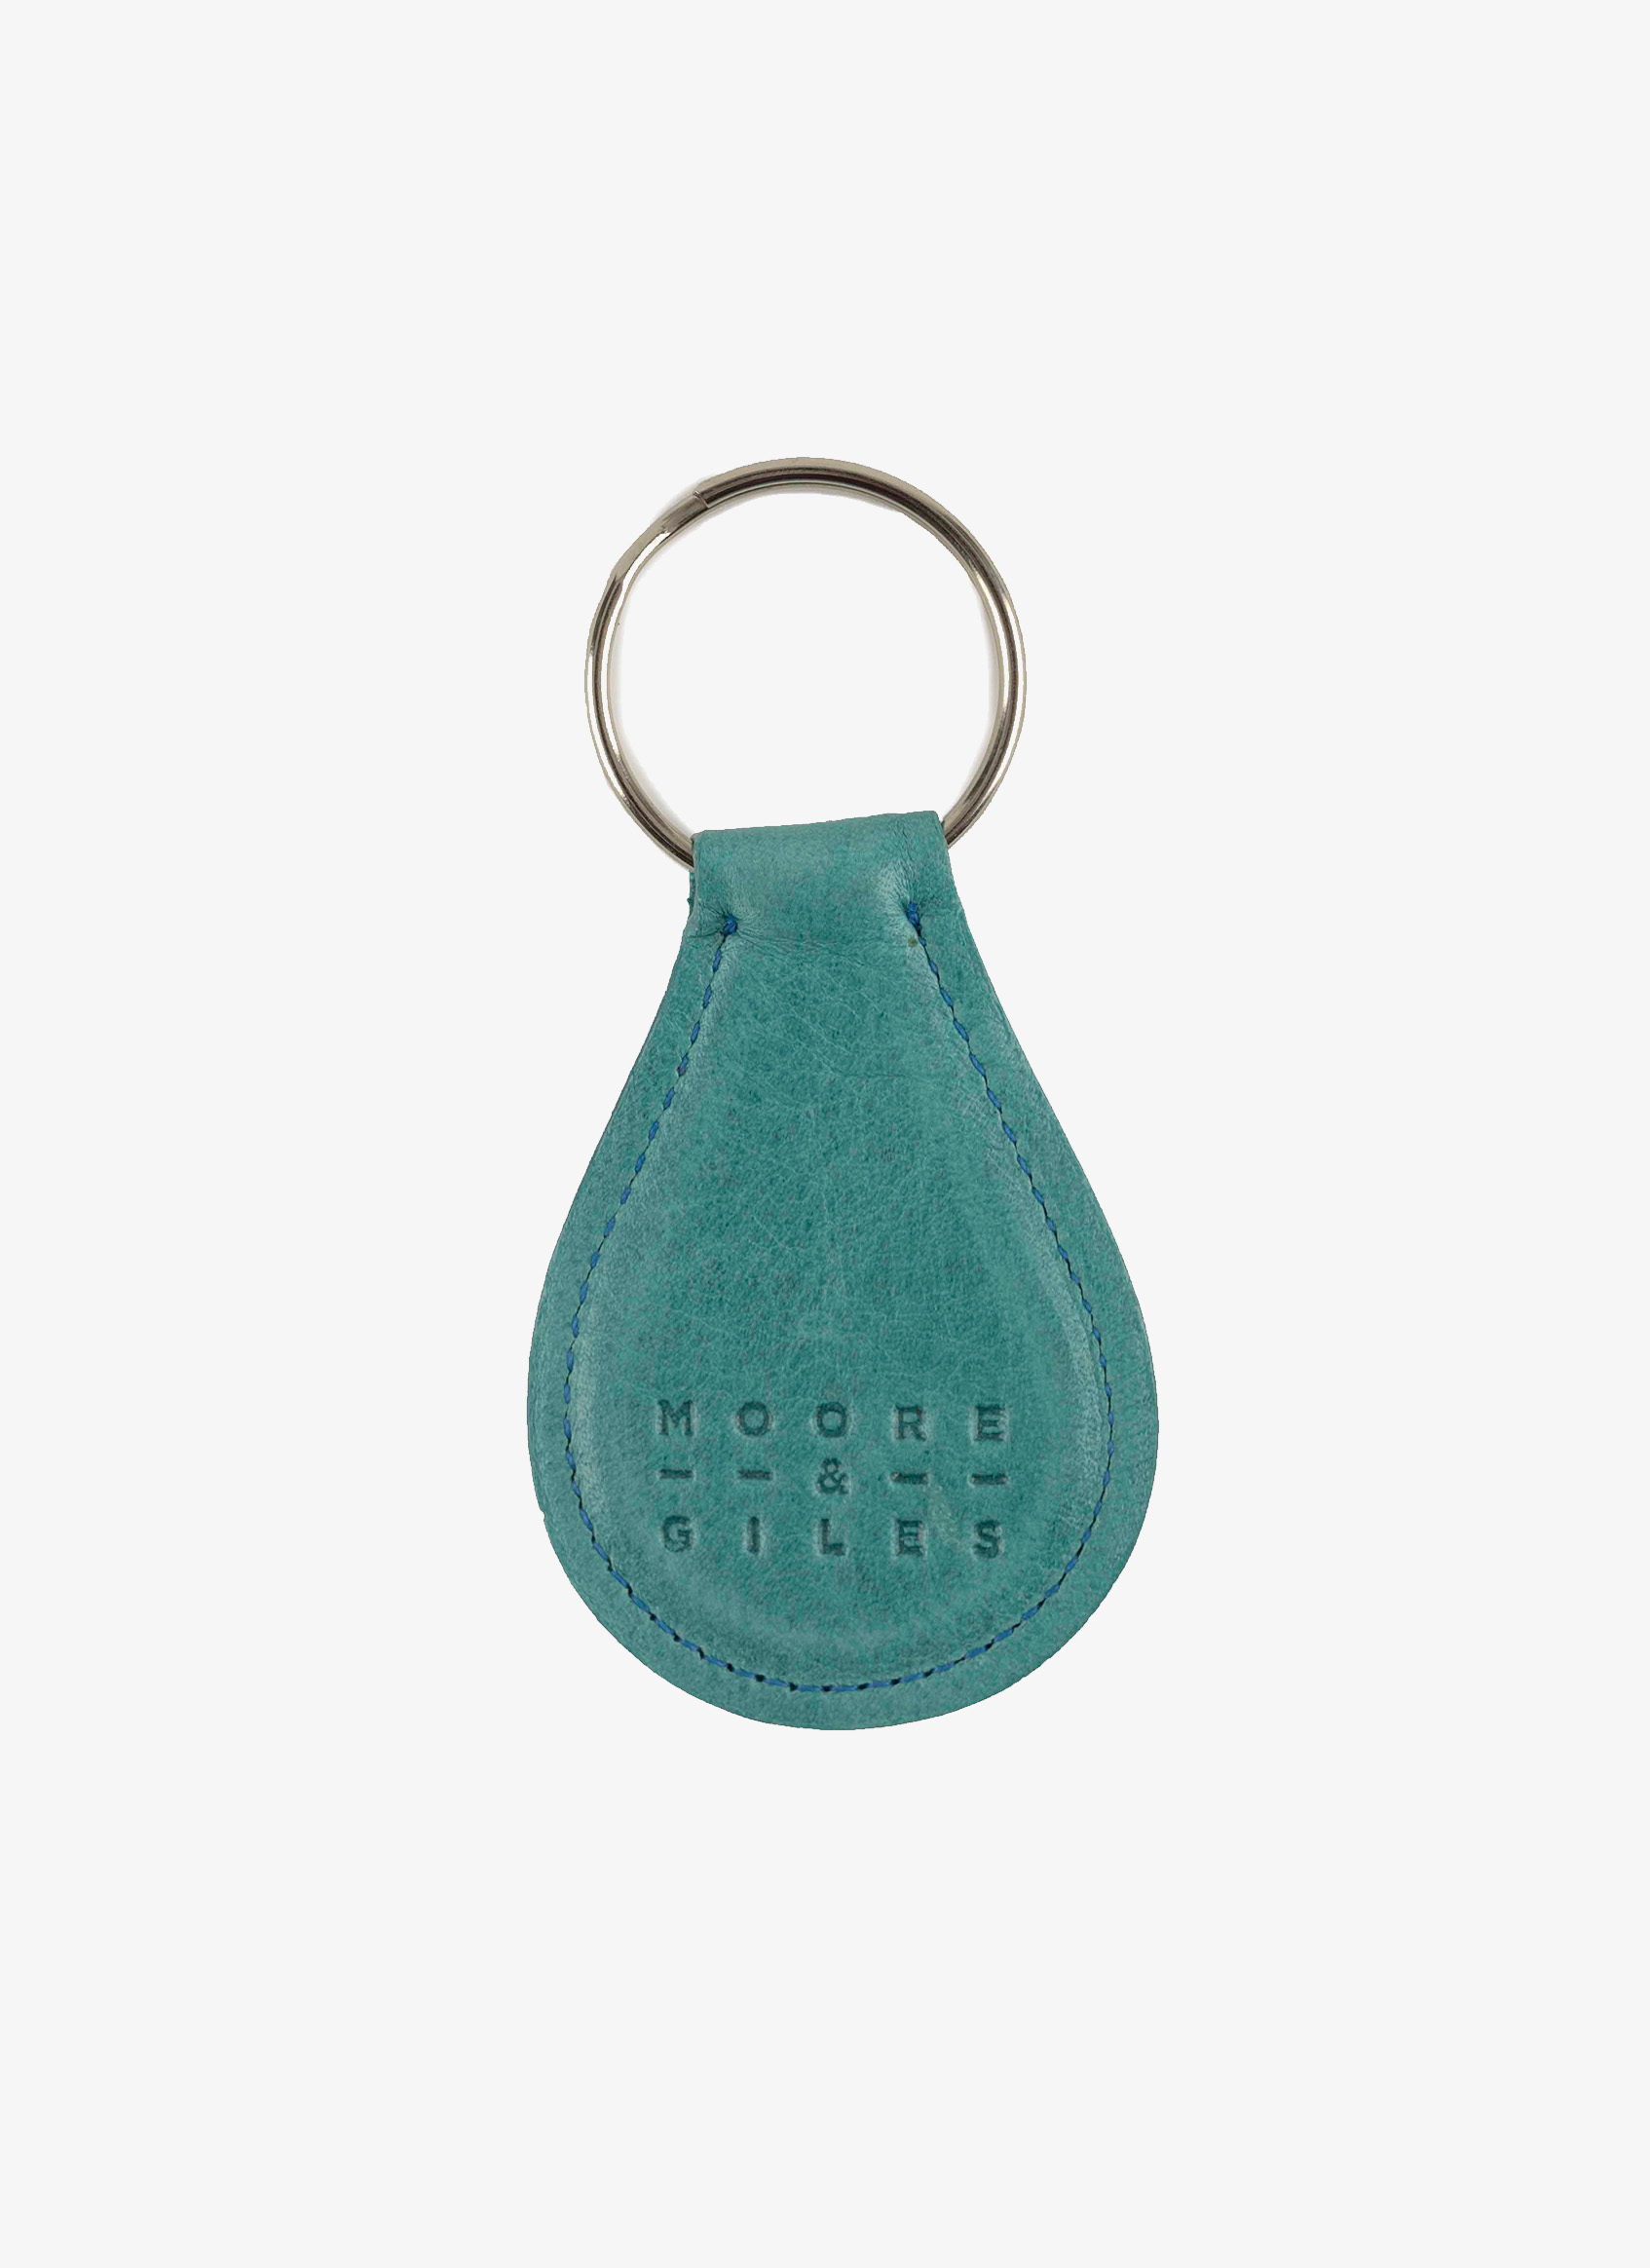 Personalised gift, Leather key chain, Custom Drop Shape Ring, Fob Holder